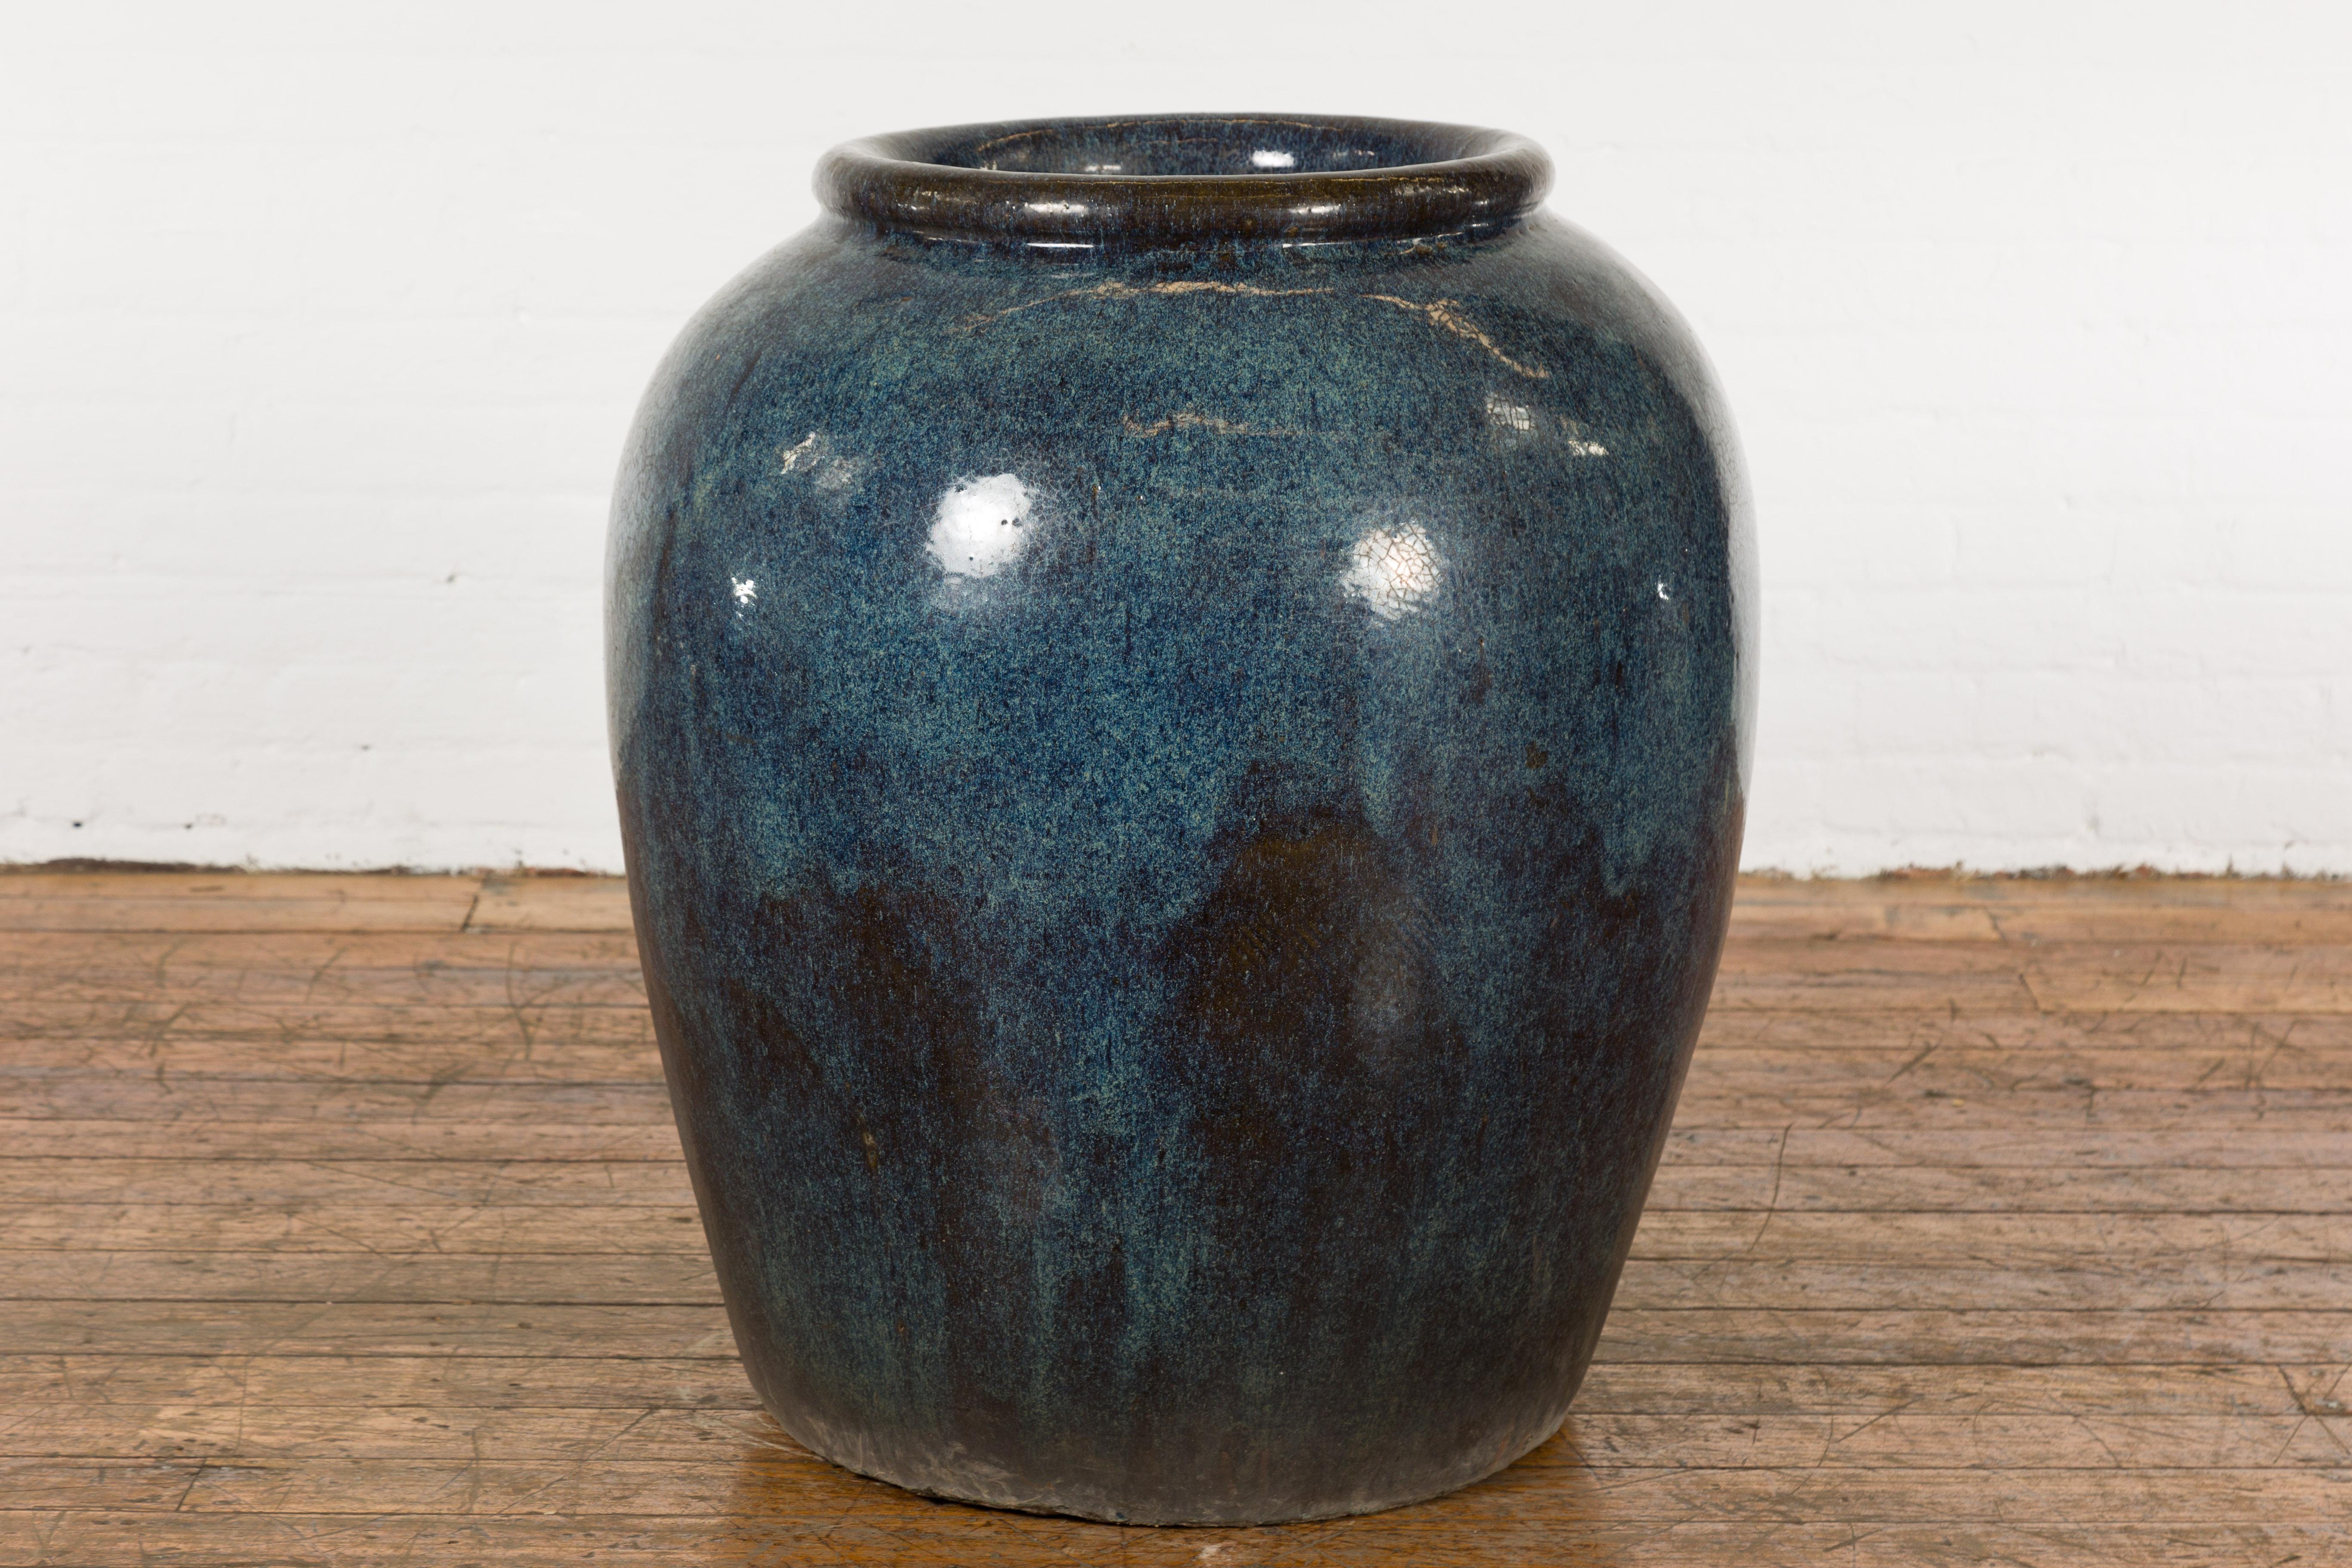 An oversized vintage Japanese Shigaraki style Thai planter from the Mid-20th Century with namako inspired blue glaze. Created in Thailand during the midcentury period, this large Shigaraki style planter features a circular opening measuring 16